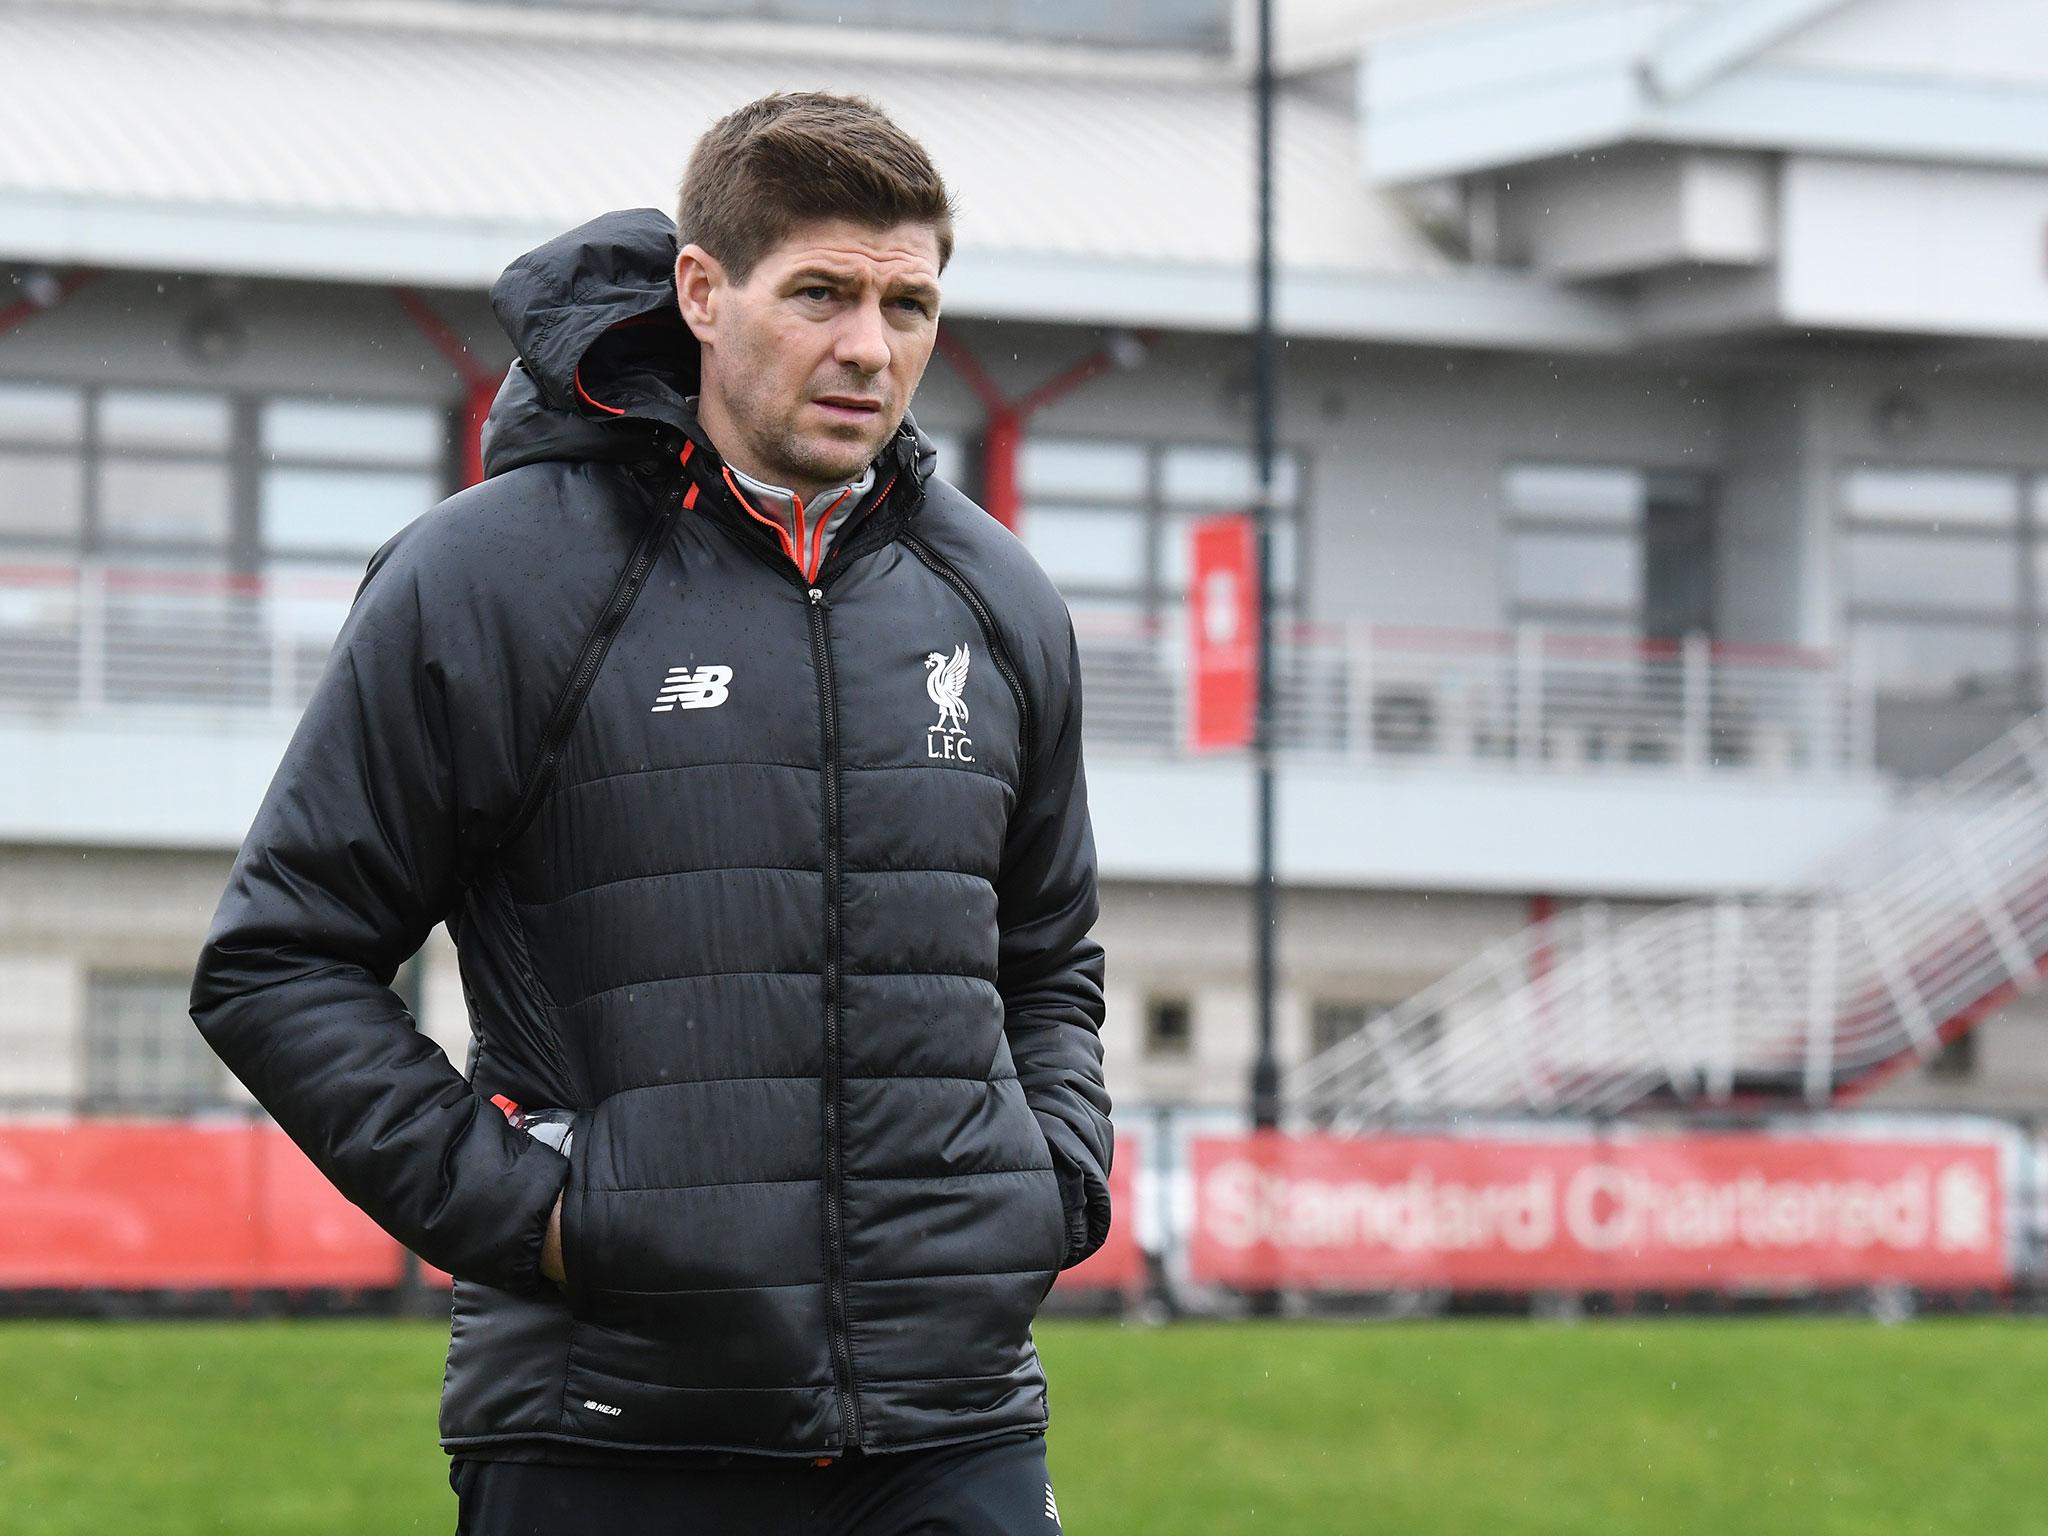 Gerrard has closely aligned himself with the under-18s side